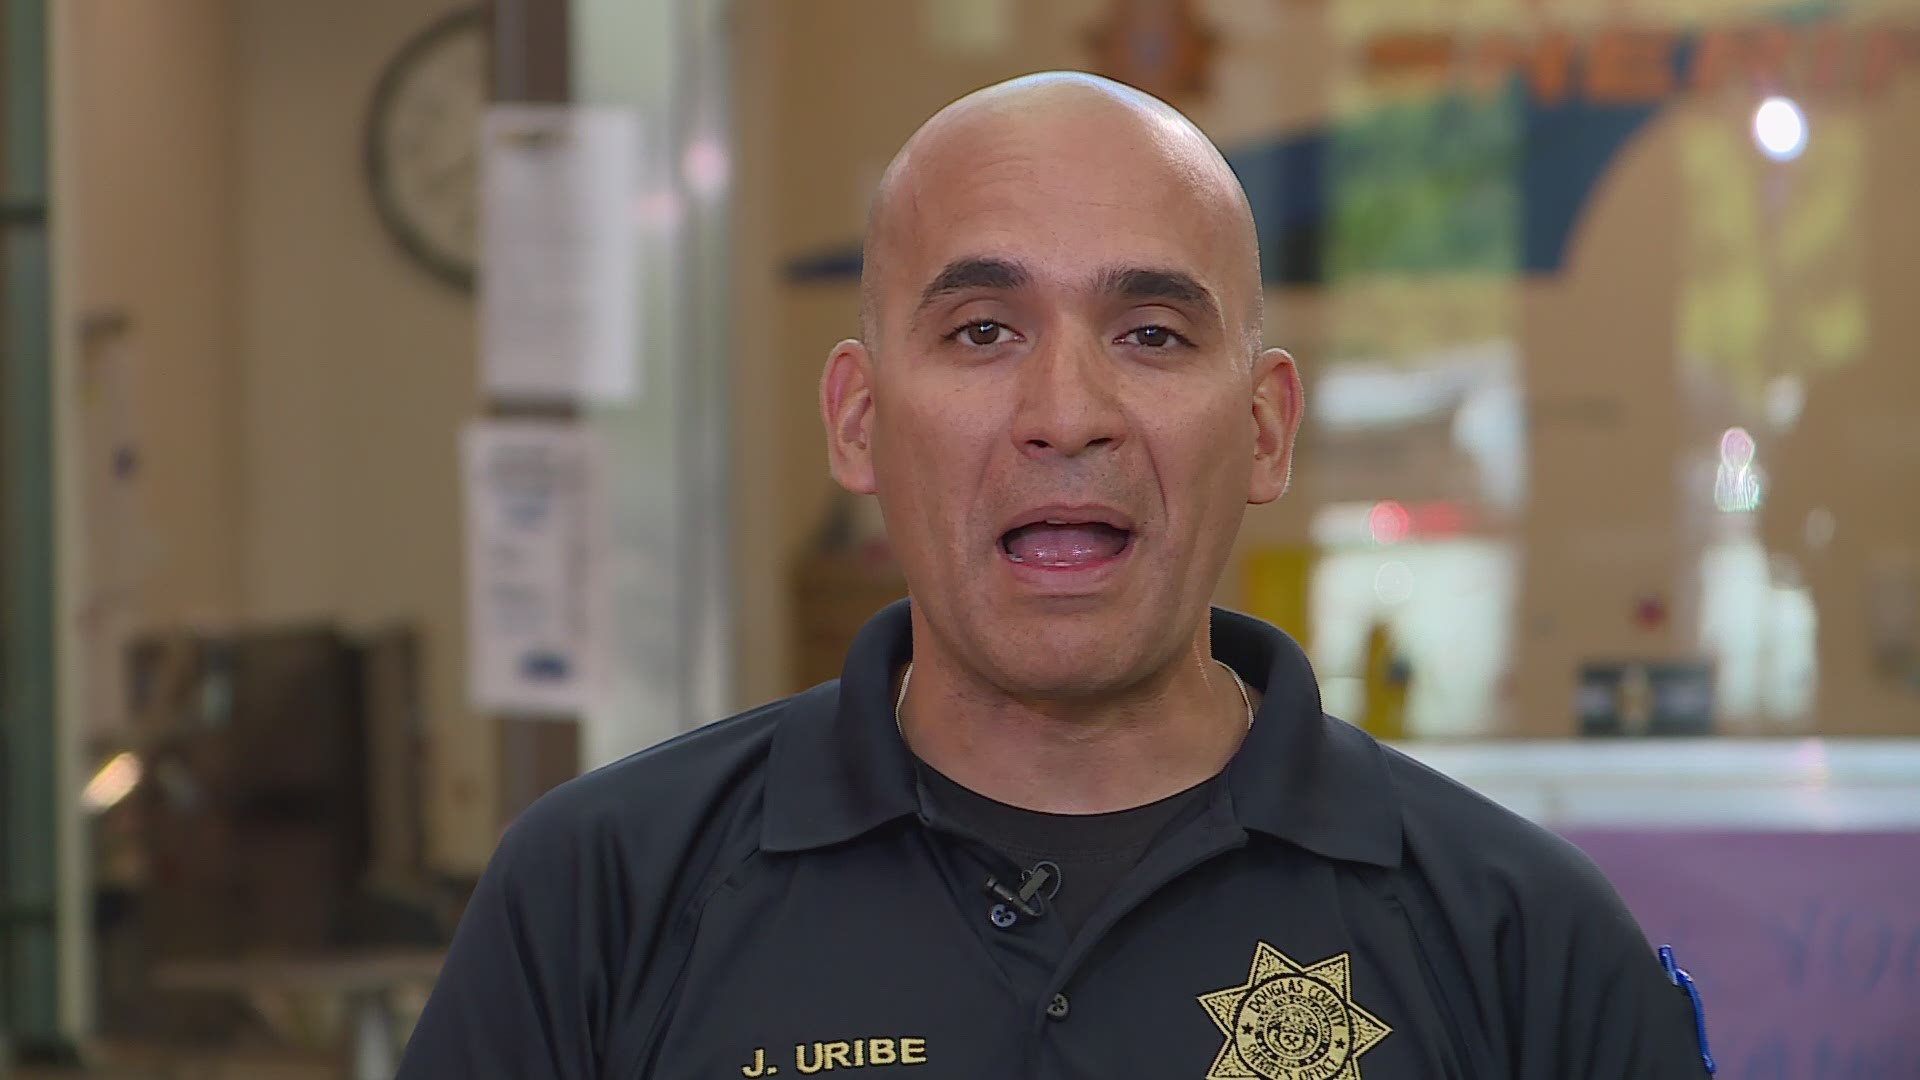 Deputy Gabriel Uribe shares how his background in law enforcement will help in his new role as school resource officer at STEM School Highlands Ranch.